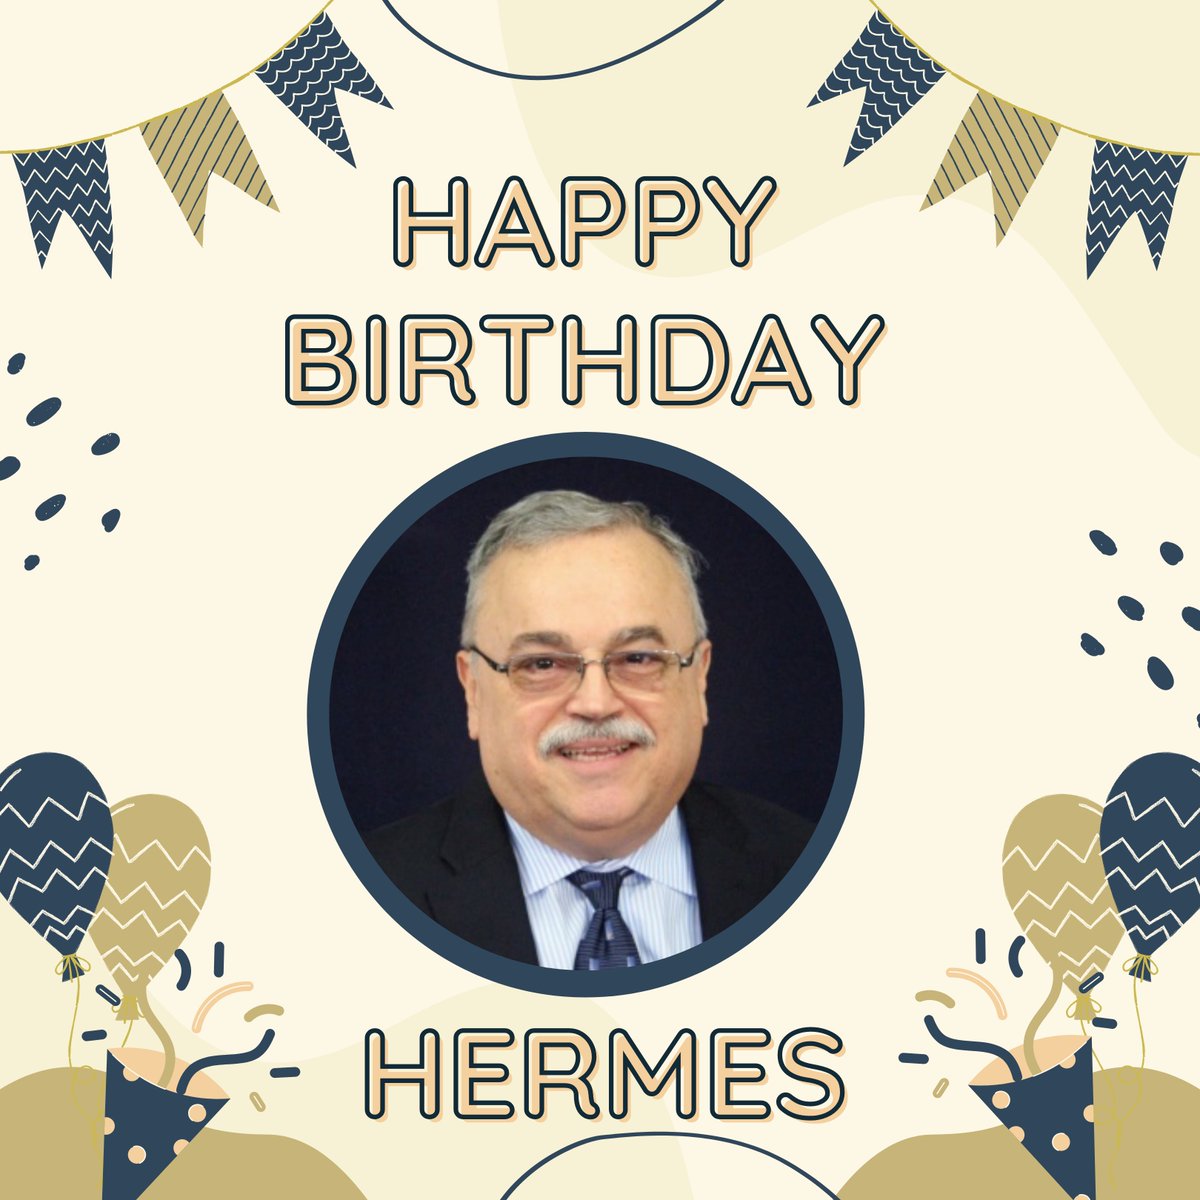 Please join us in wishing Hermes Troche a Happy Birthday! He brings so much fun to our office, and is quick to dive into any task at hand to lighten everyone's load. Hope your birthday weekend is great Hermes! #workfamily #birthday